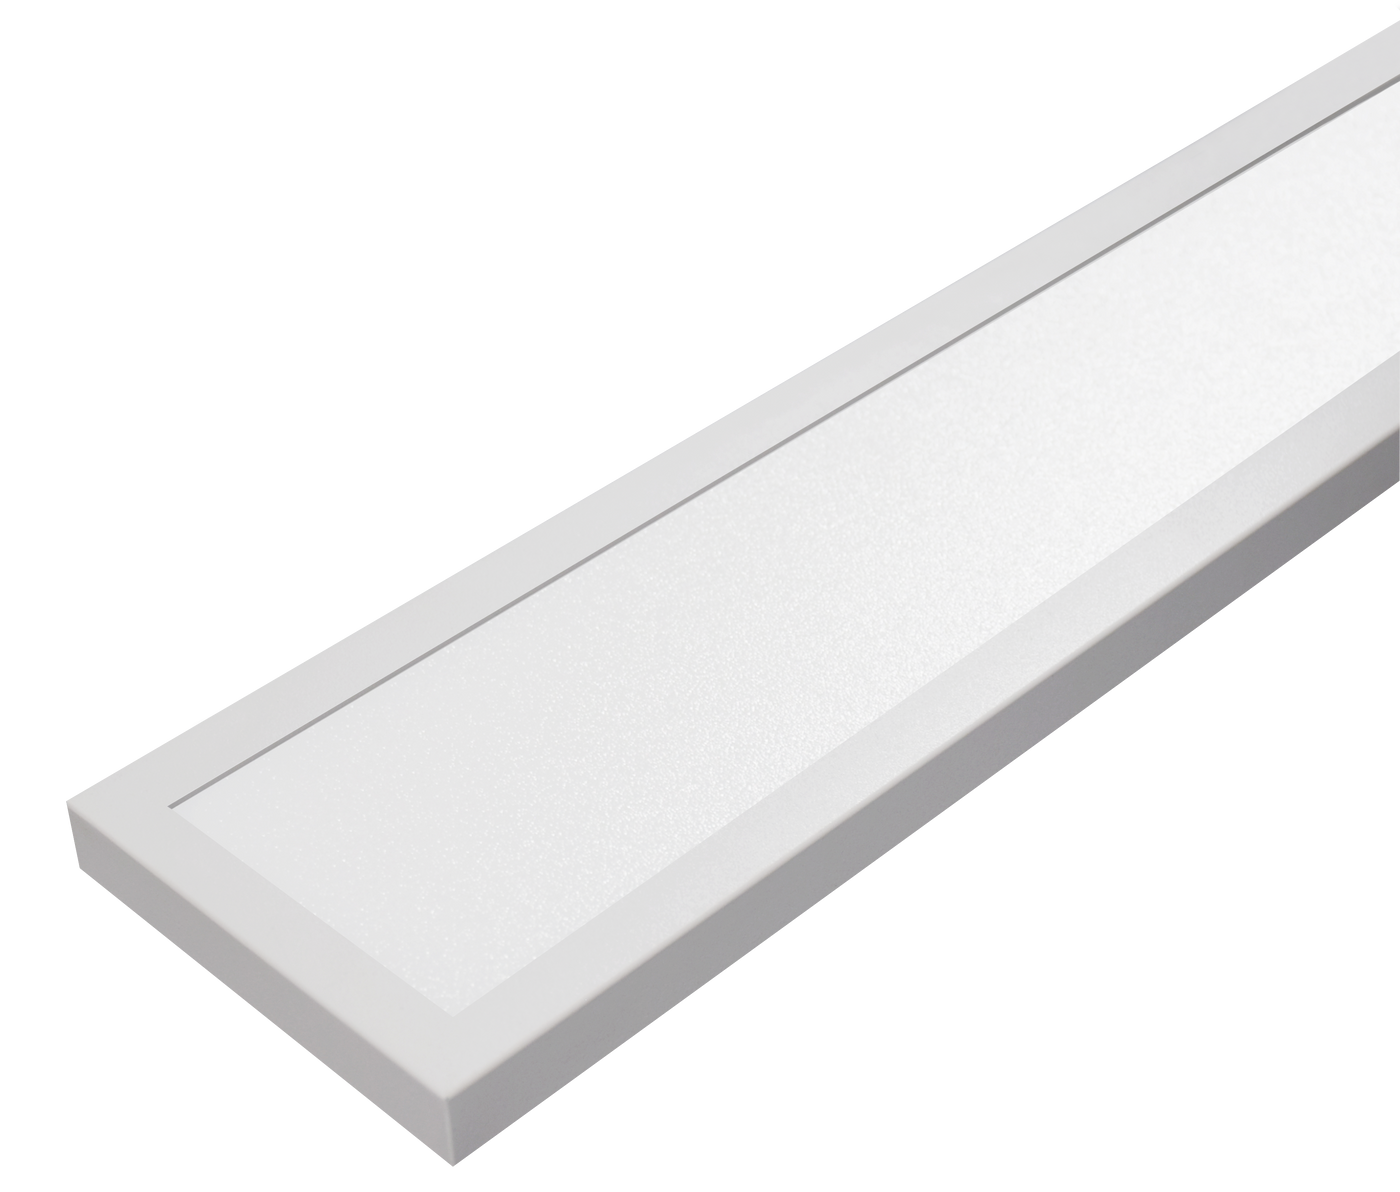 4FT Slim 4" Linear Recessed Light, 3400 Lumen Max, Wattage and CCT Selectable, 110-277V